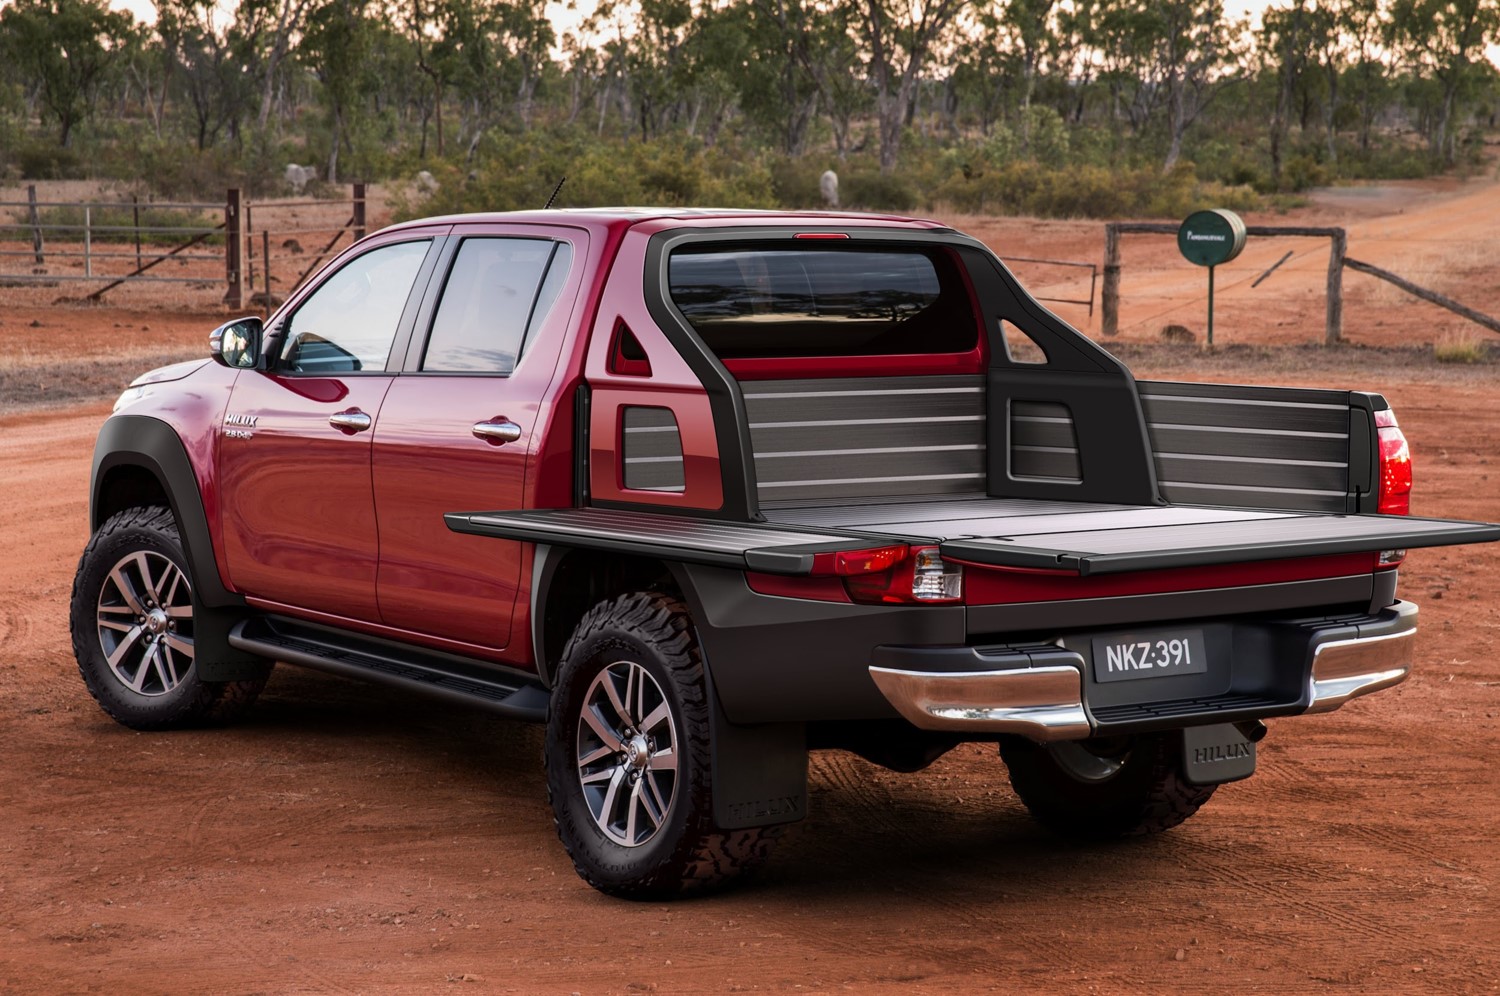 Sport Utility Bed installed on a Toyota HiLux